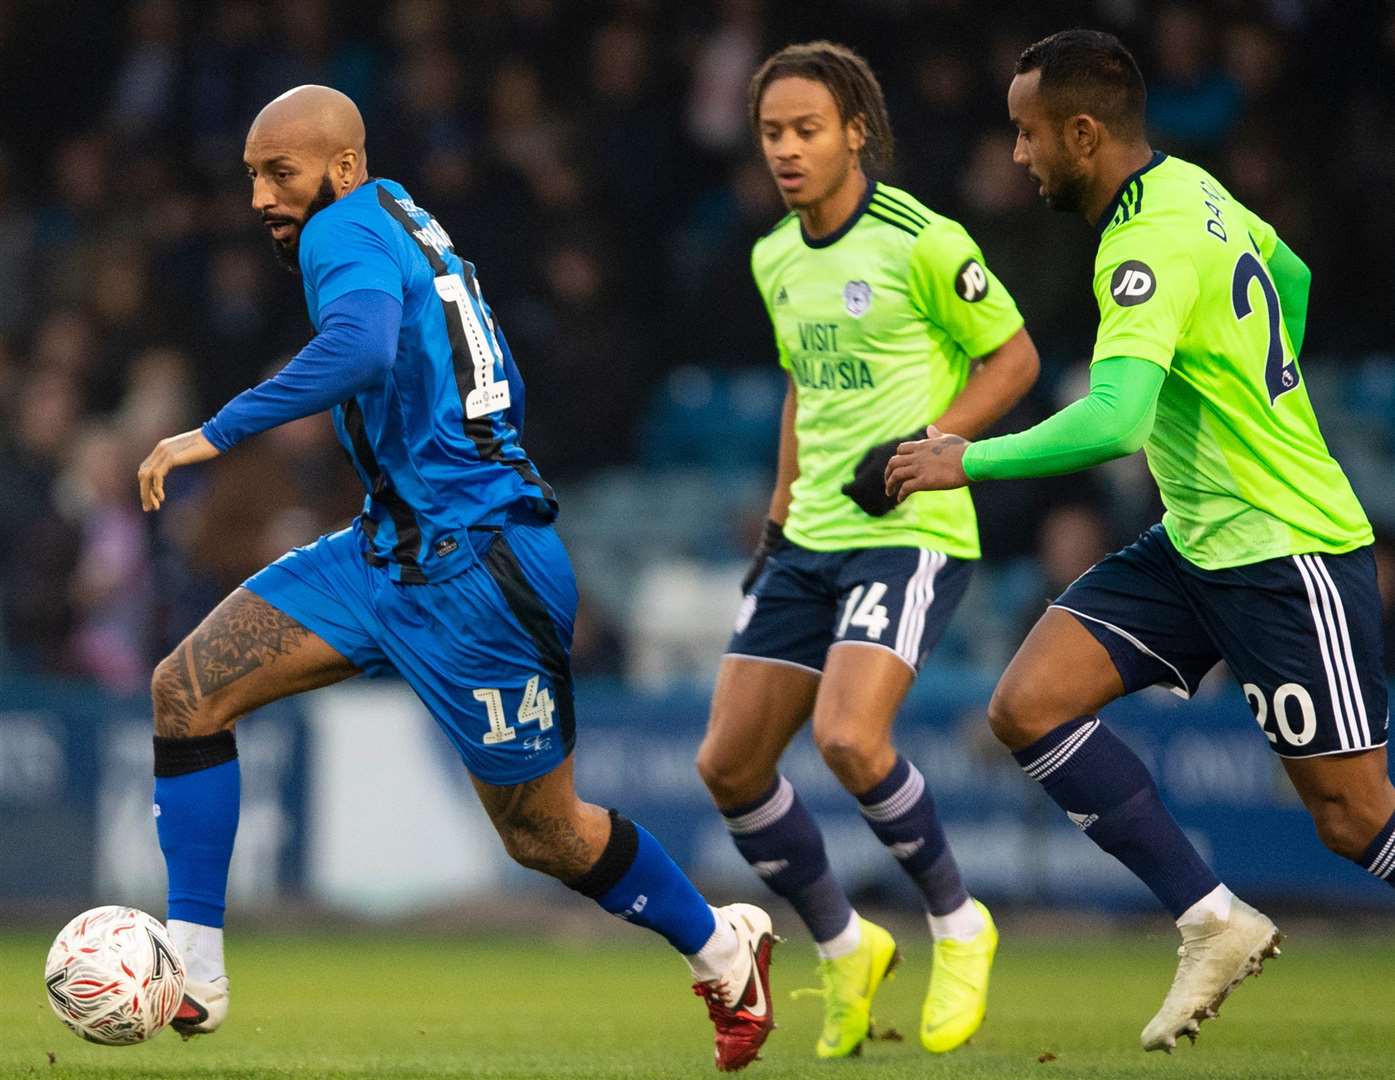 Josh Parker looks to set an early attack up, getting away from Loie Damour and Nathaniel Mendez-Laing Picture: Ady Kerry